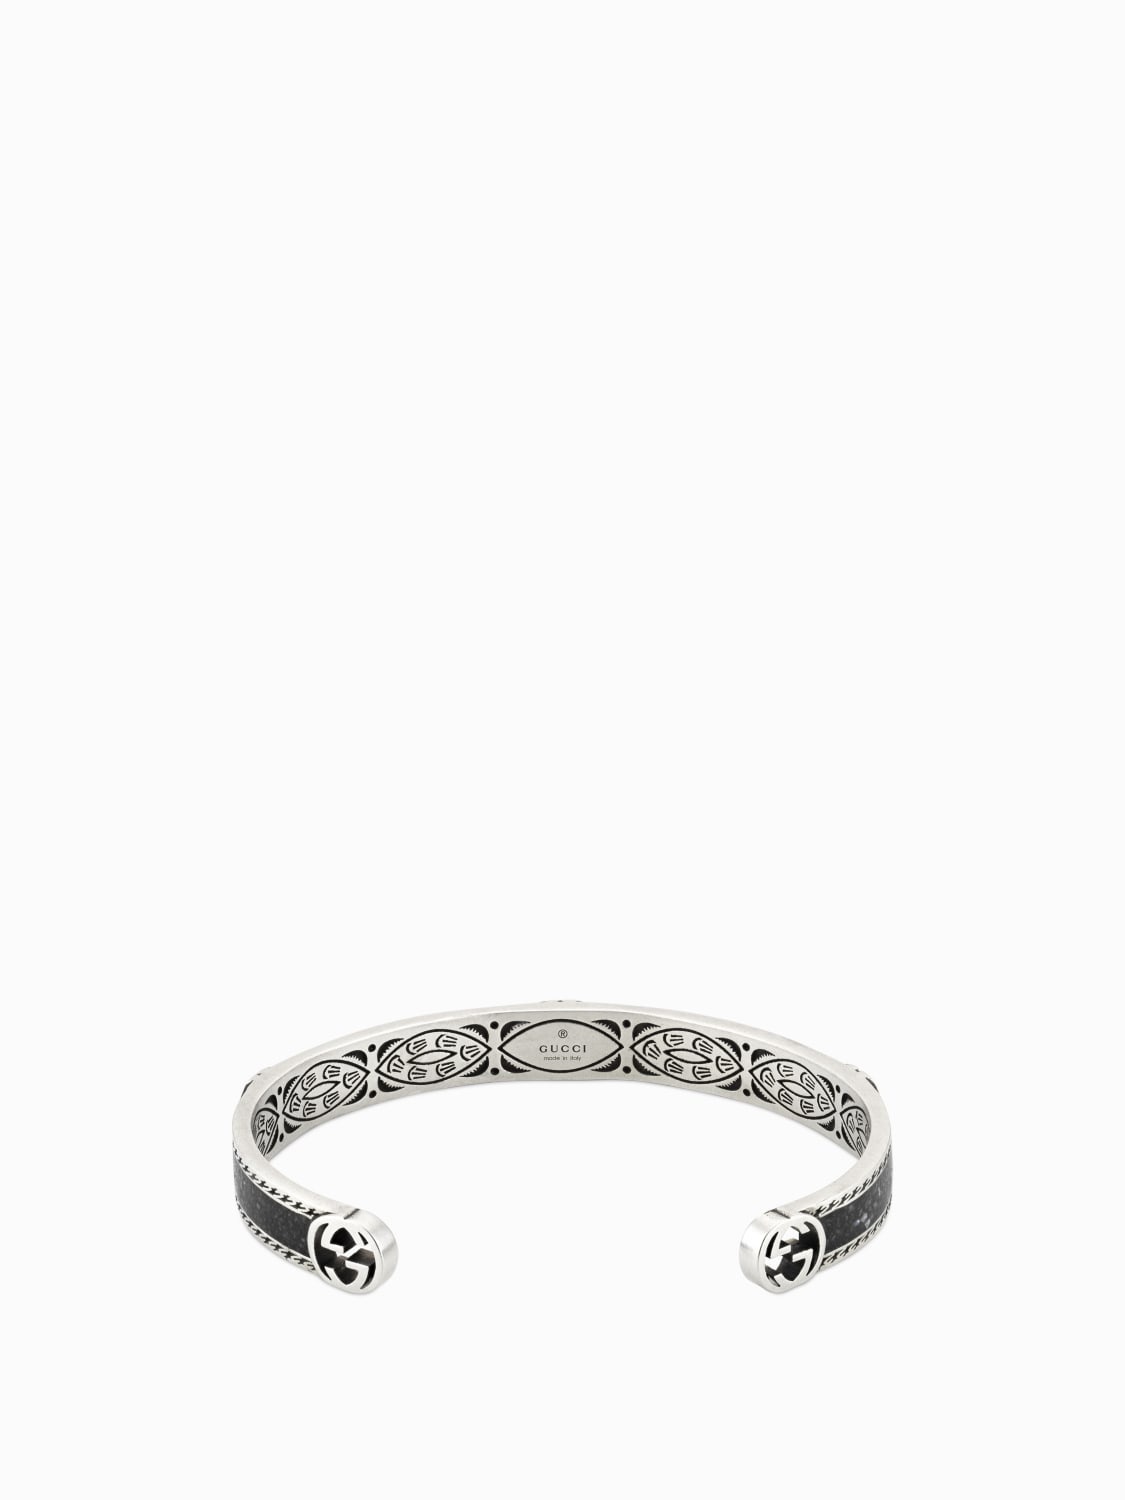 Interlocking G Cuff Gucci bracelet in enamelled silver with GG monogram and decorated crest - 2